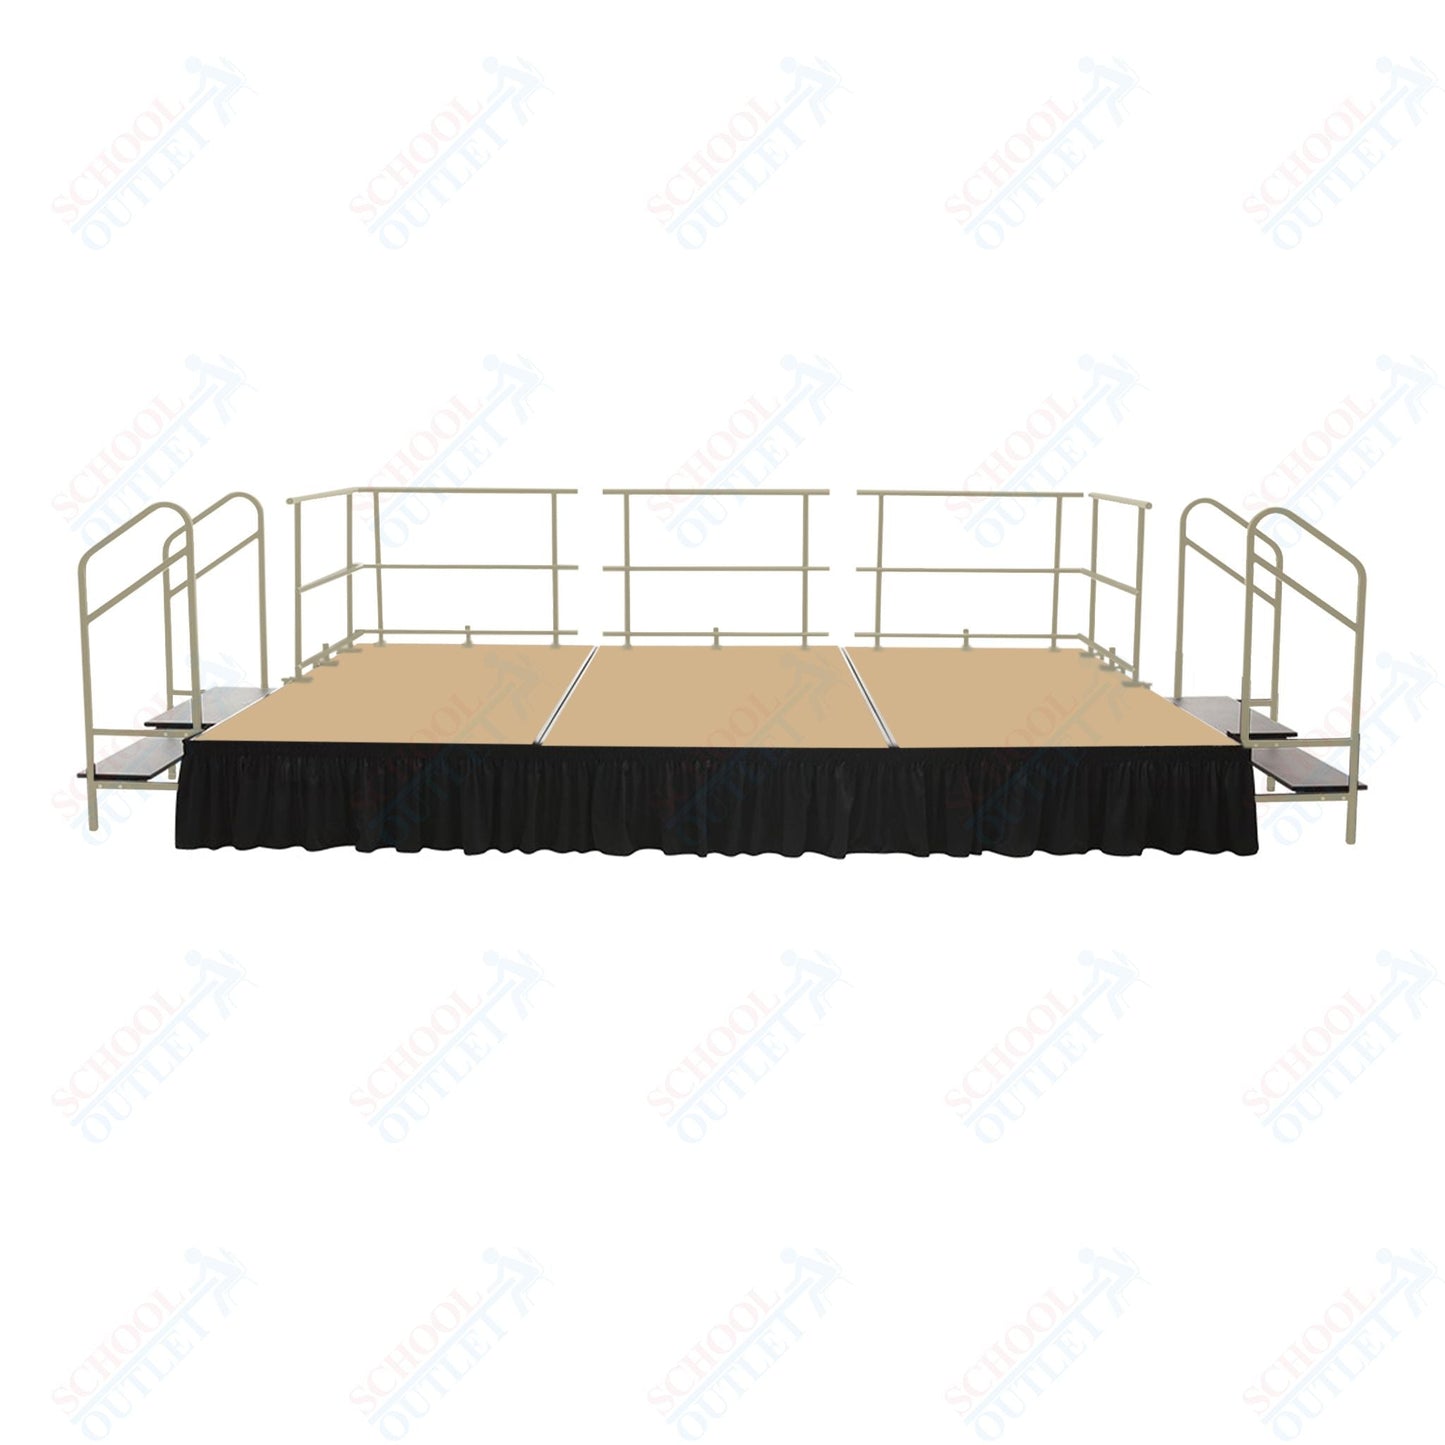 AmTab Fixed Height Stage Set - Carpet Top - 16'W x 32'L x 2'H (192"W x 384"L x 24"H) (AmTab AMT - STS163224C) - SchoolOutlet